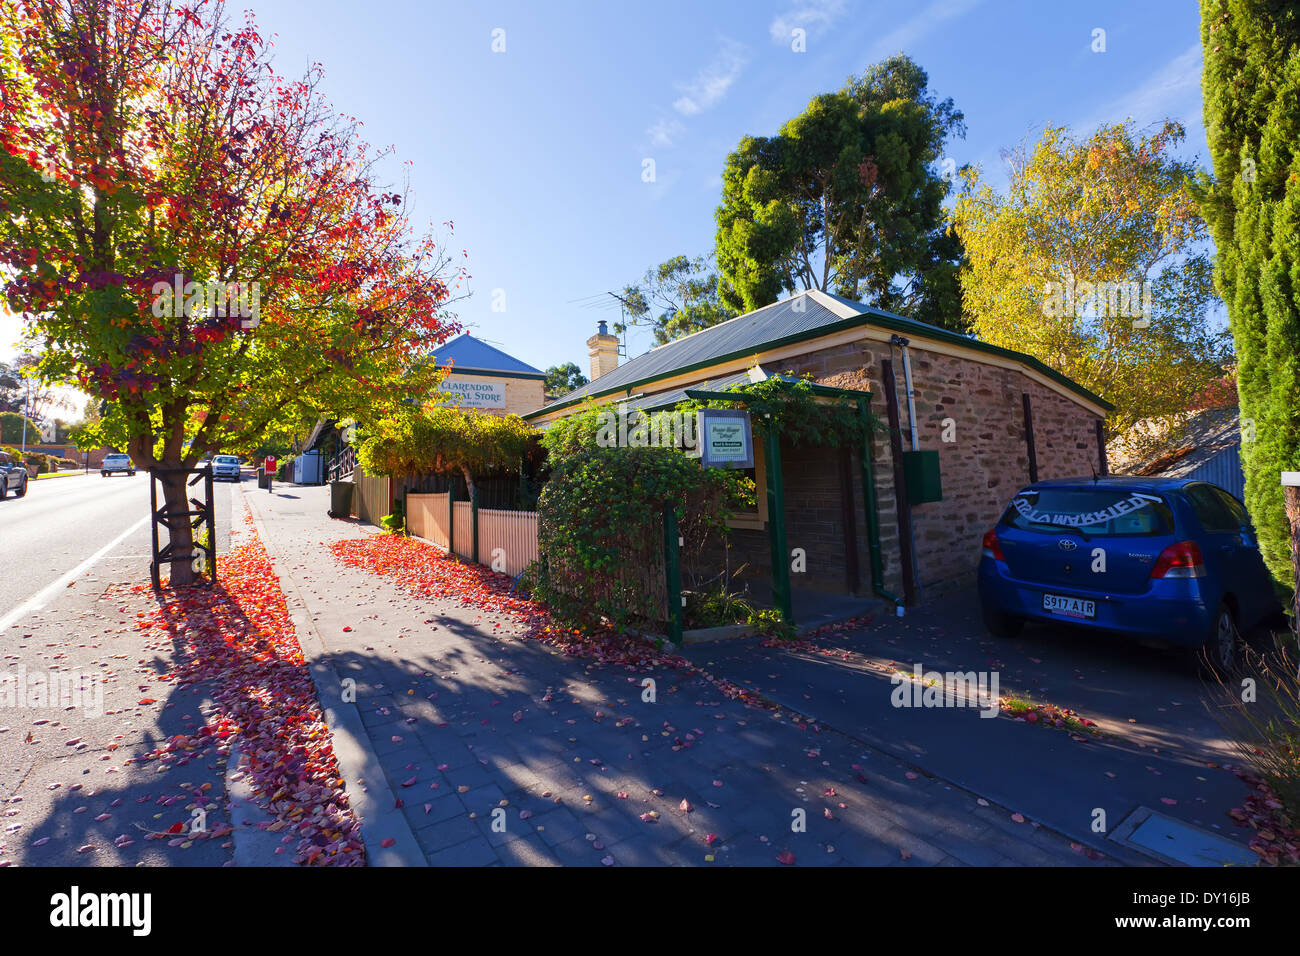 old cottage footpath church main street Clarendon Adelaide Hills South Australia autumn leaves Stock Photo